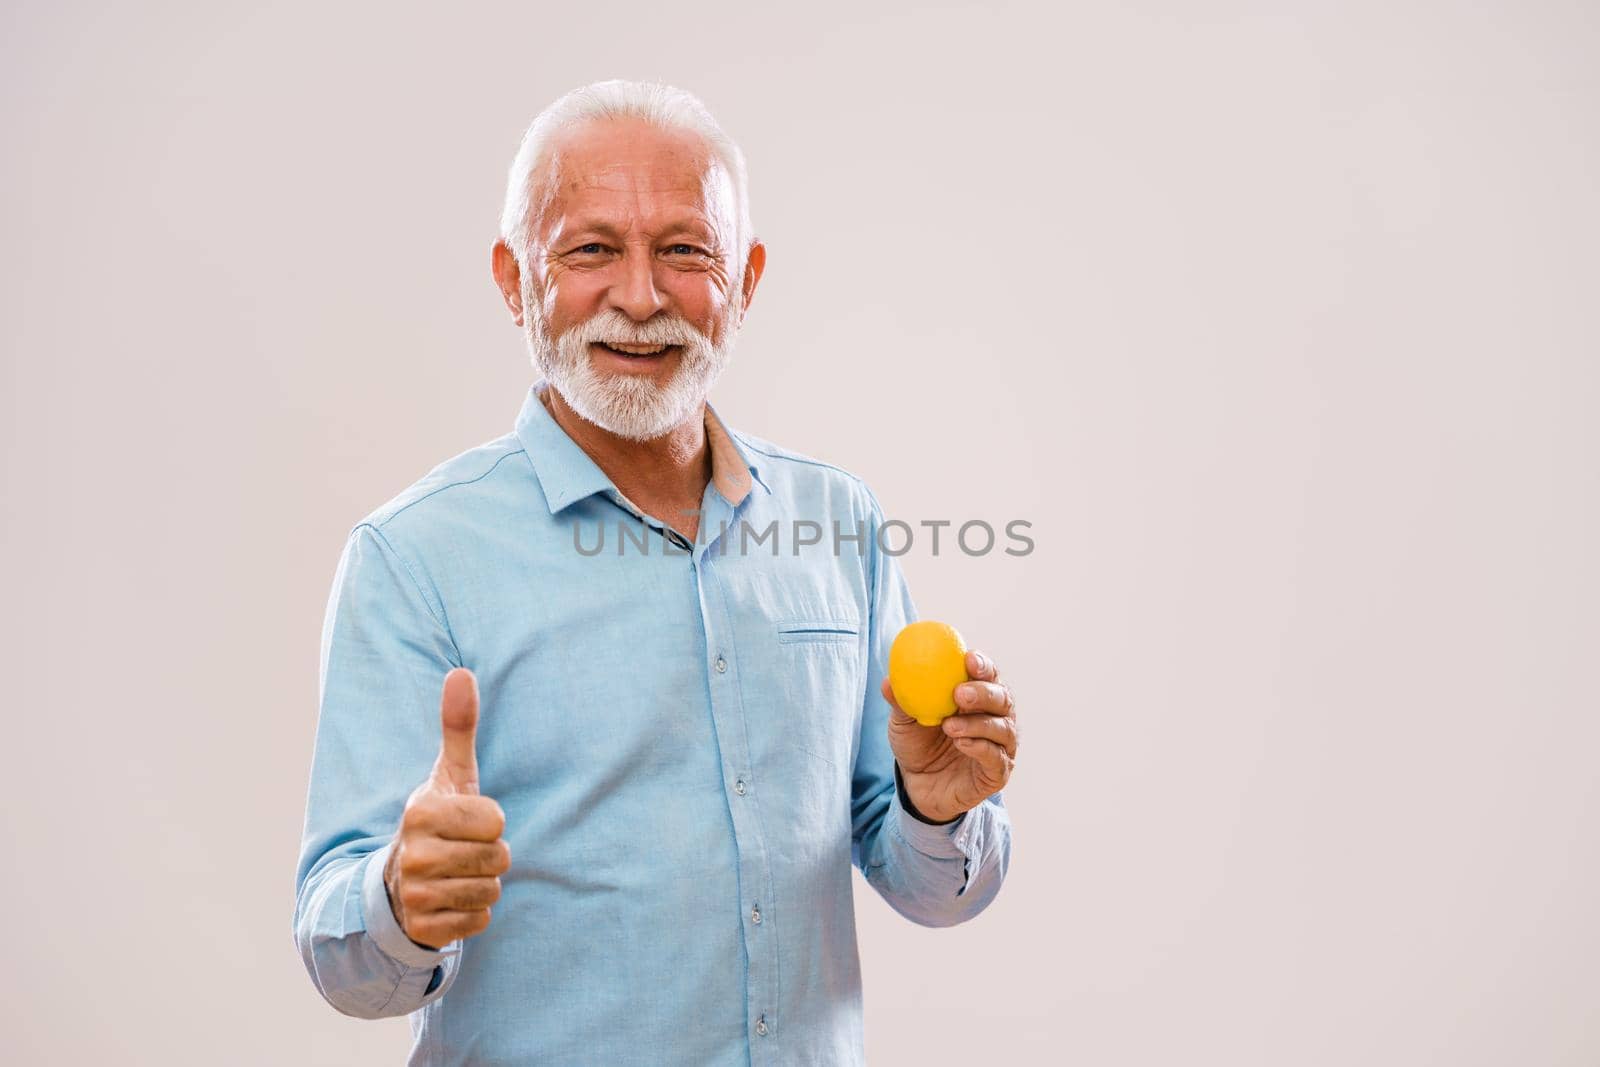 Portrait of cheerful senior man who is holding lemon and smiling.